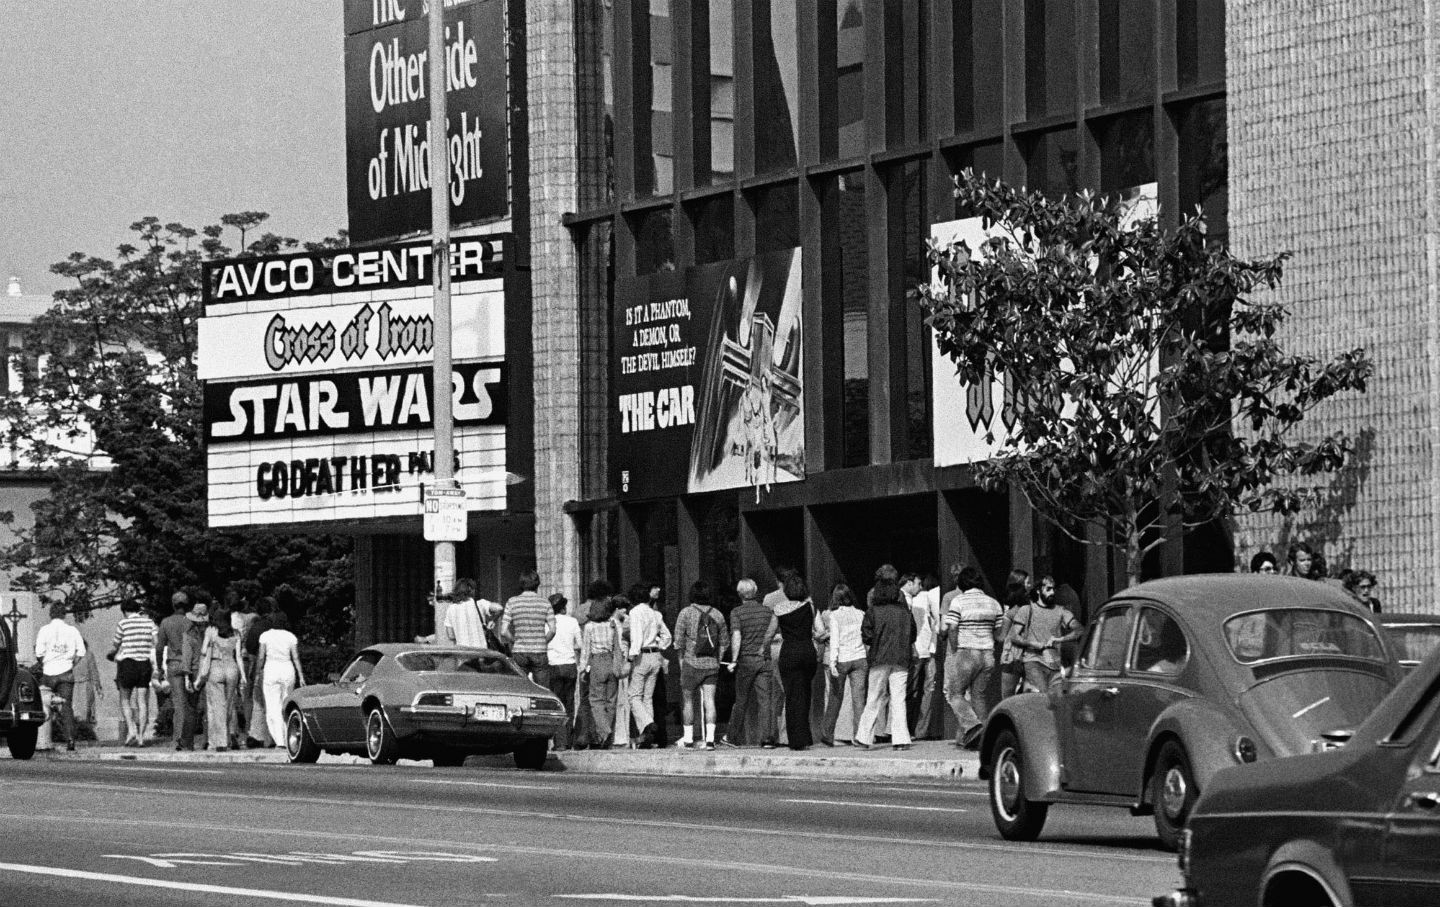 May 25, 1977: ‘Star Wars’ Opens in Theaters